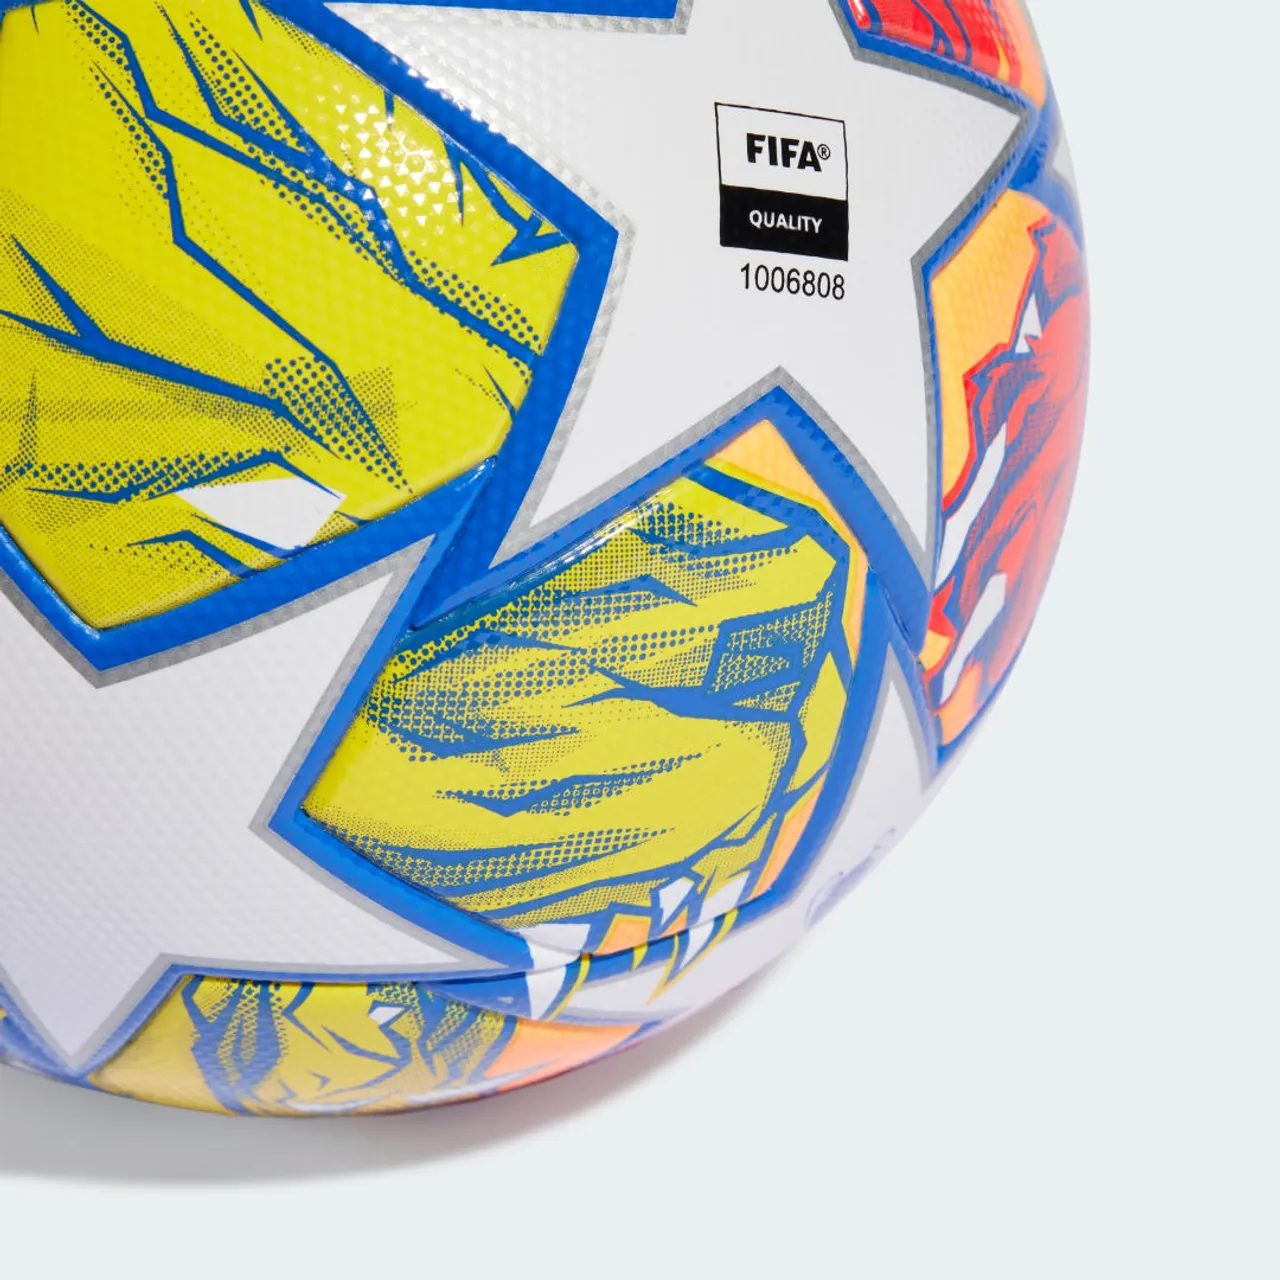 UCL League 23/24 Knock-out Ball